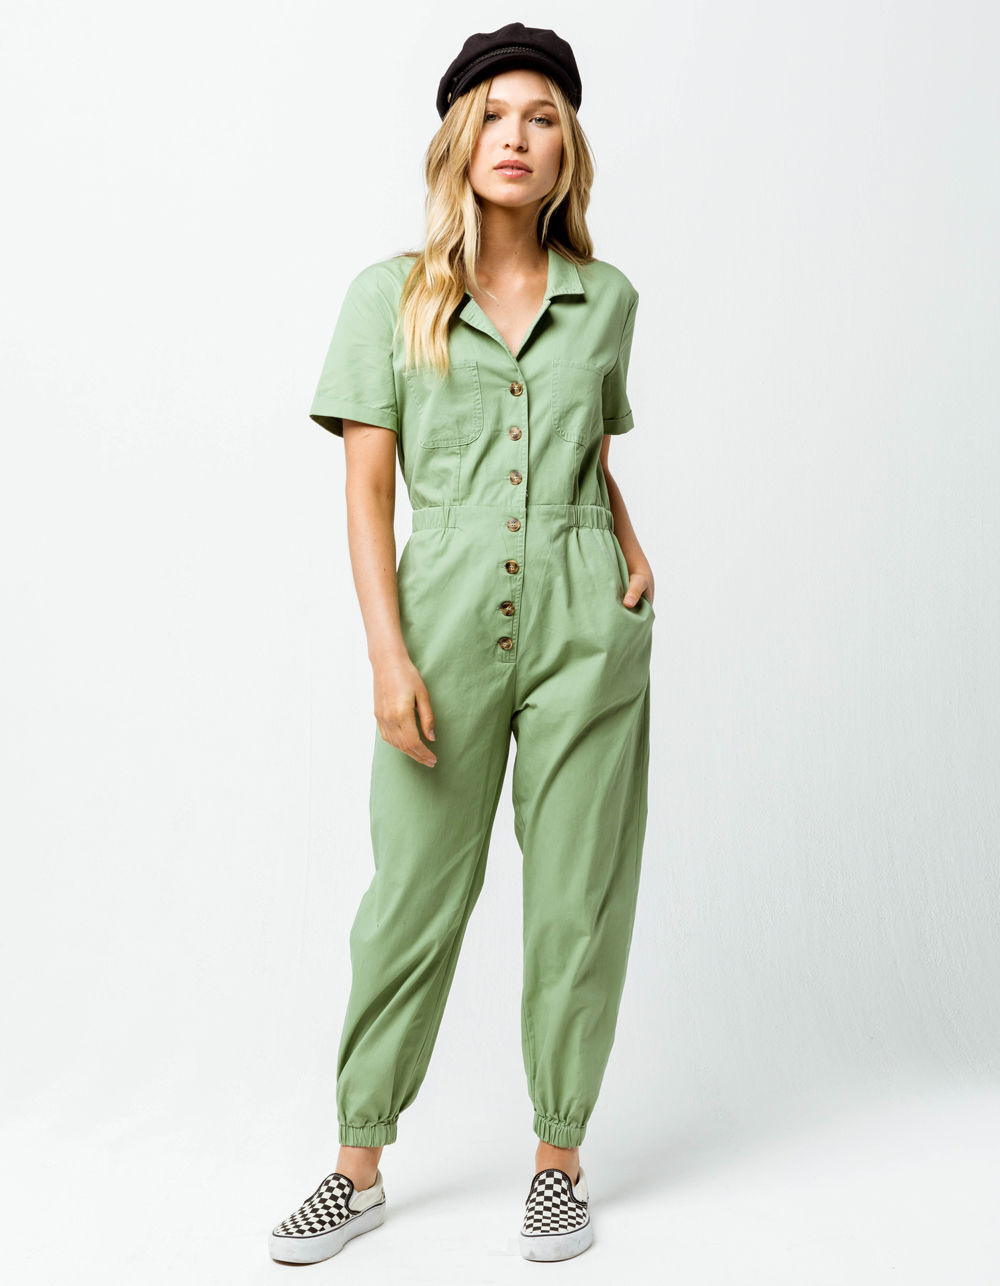 KNOW ONE CARES Utilitarian Womens Jumpsuit - SAGE | Tillys